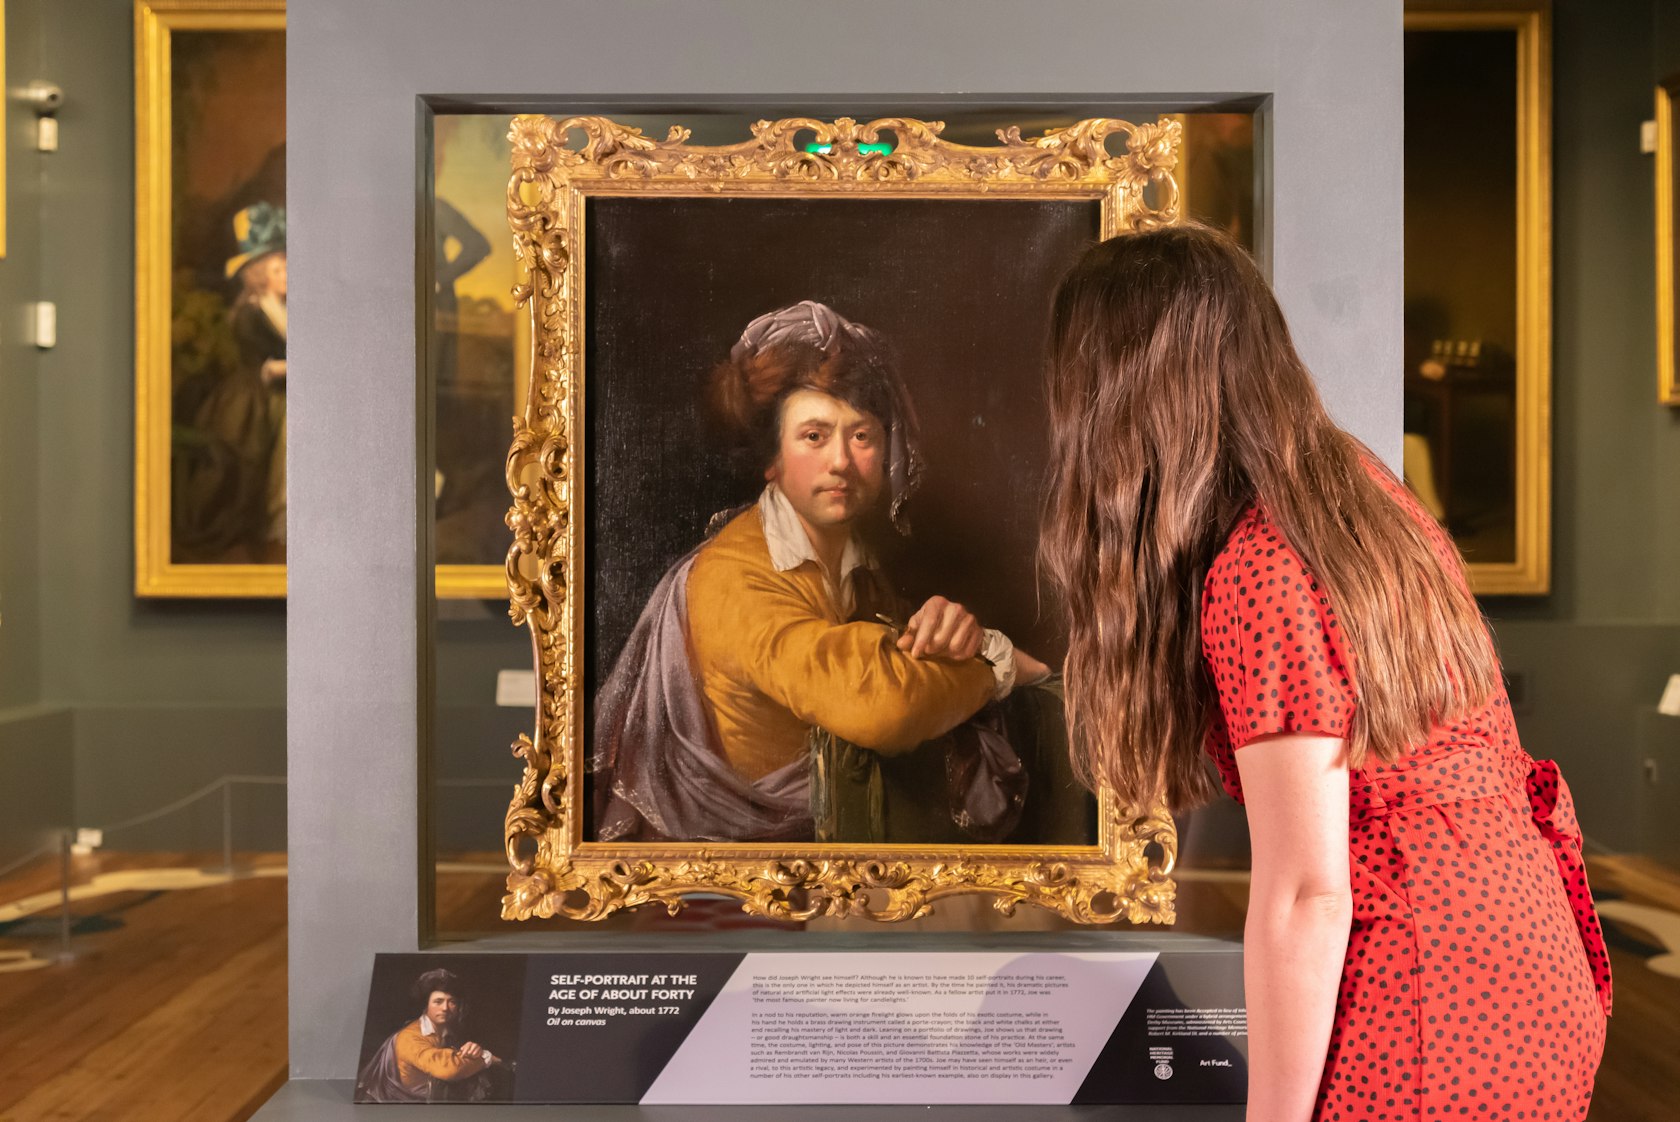 Visitor viewing ‘Self-Portrait at the age of about forty’ by Joseph Wright of Derb